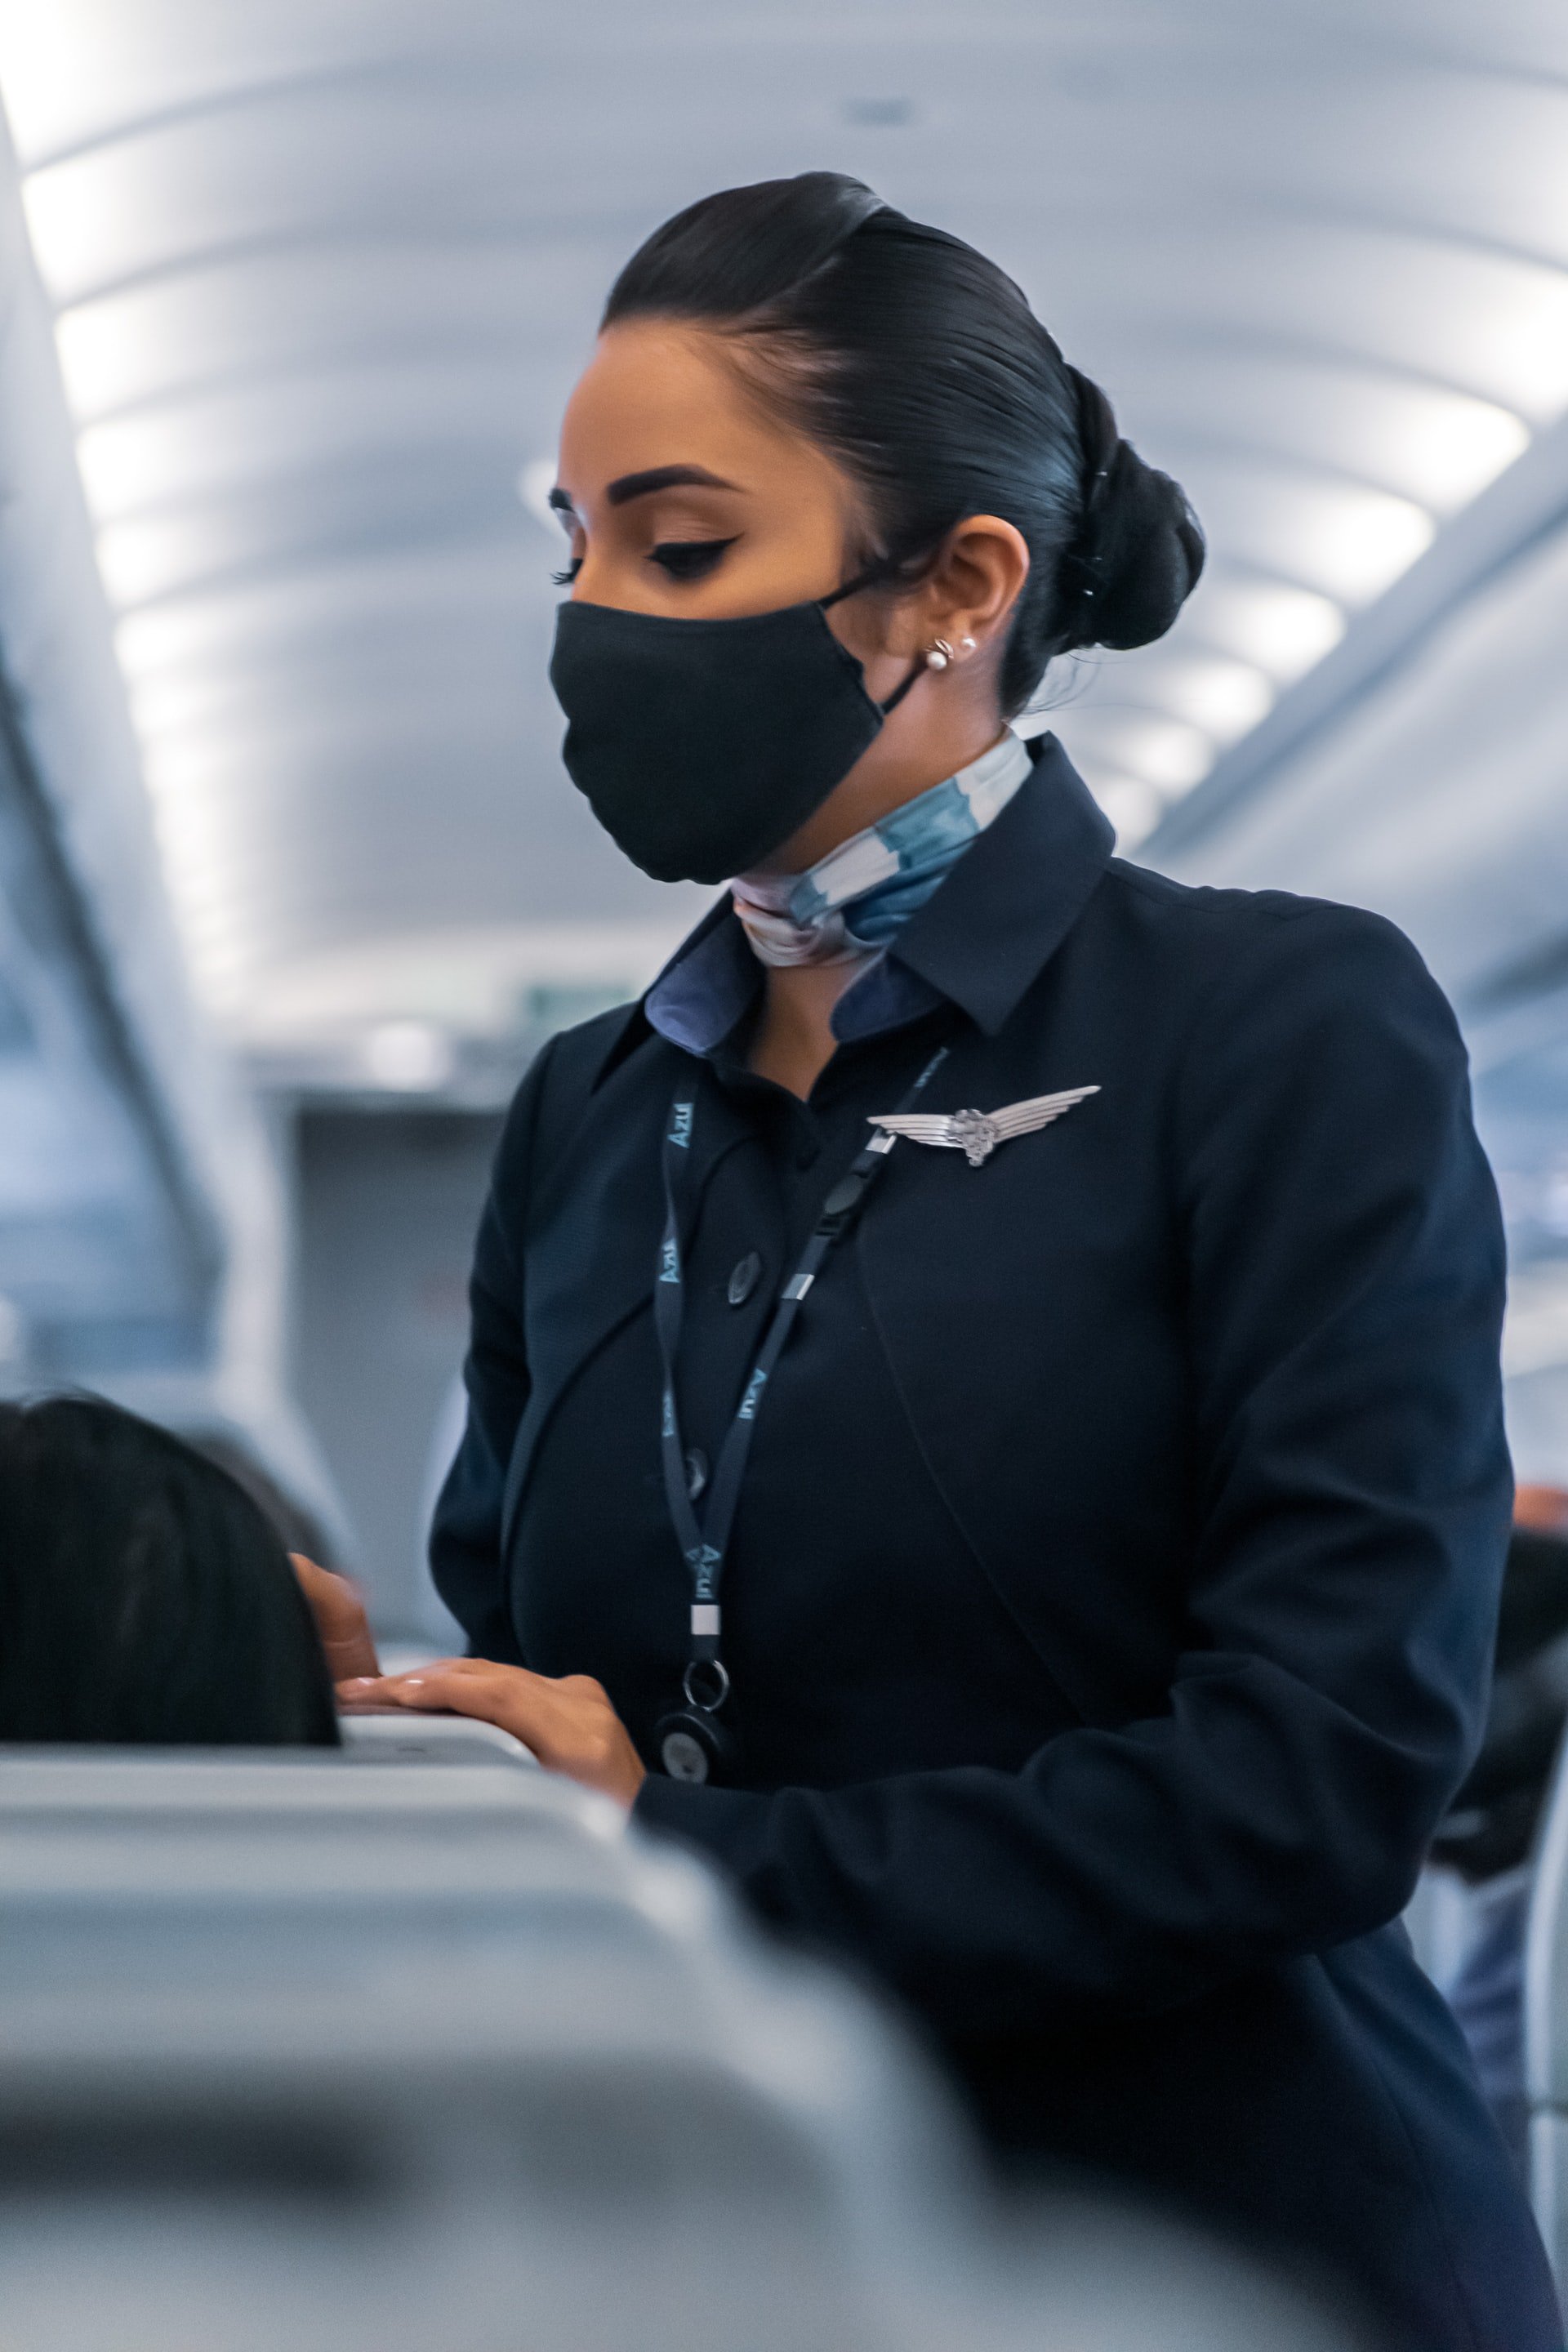 The flight attendant was almost begging him to understand the situation, but Samuel was mad. | Source: Unsplash